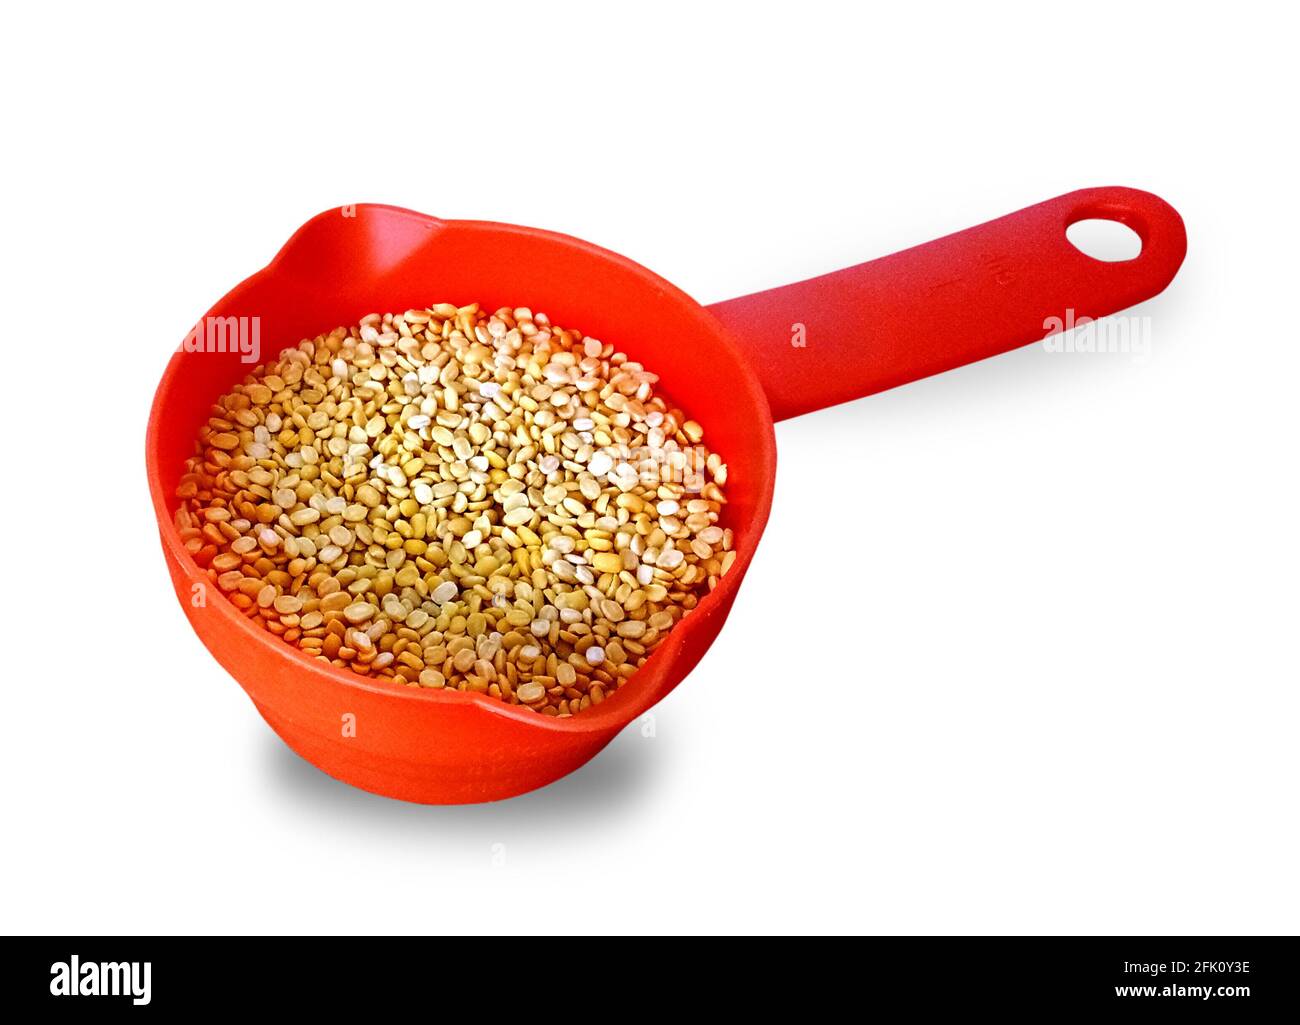 yellow moong mung dal lentil pulse bean on white background. Stock Photo